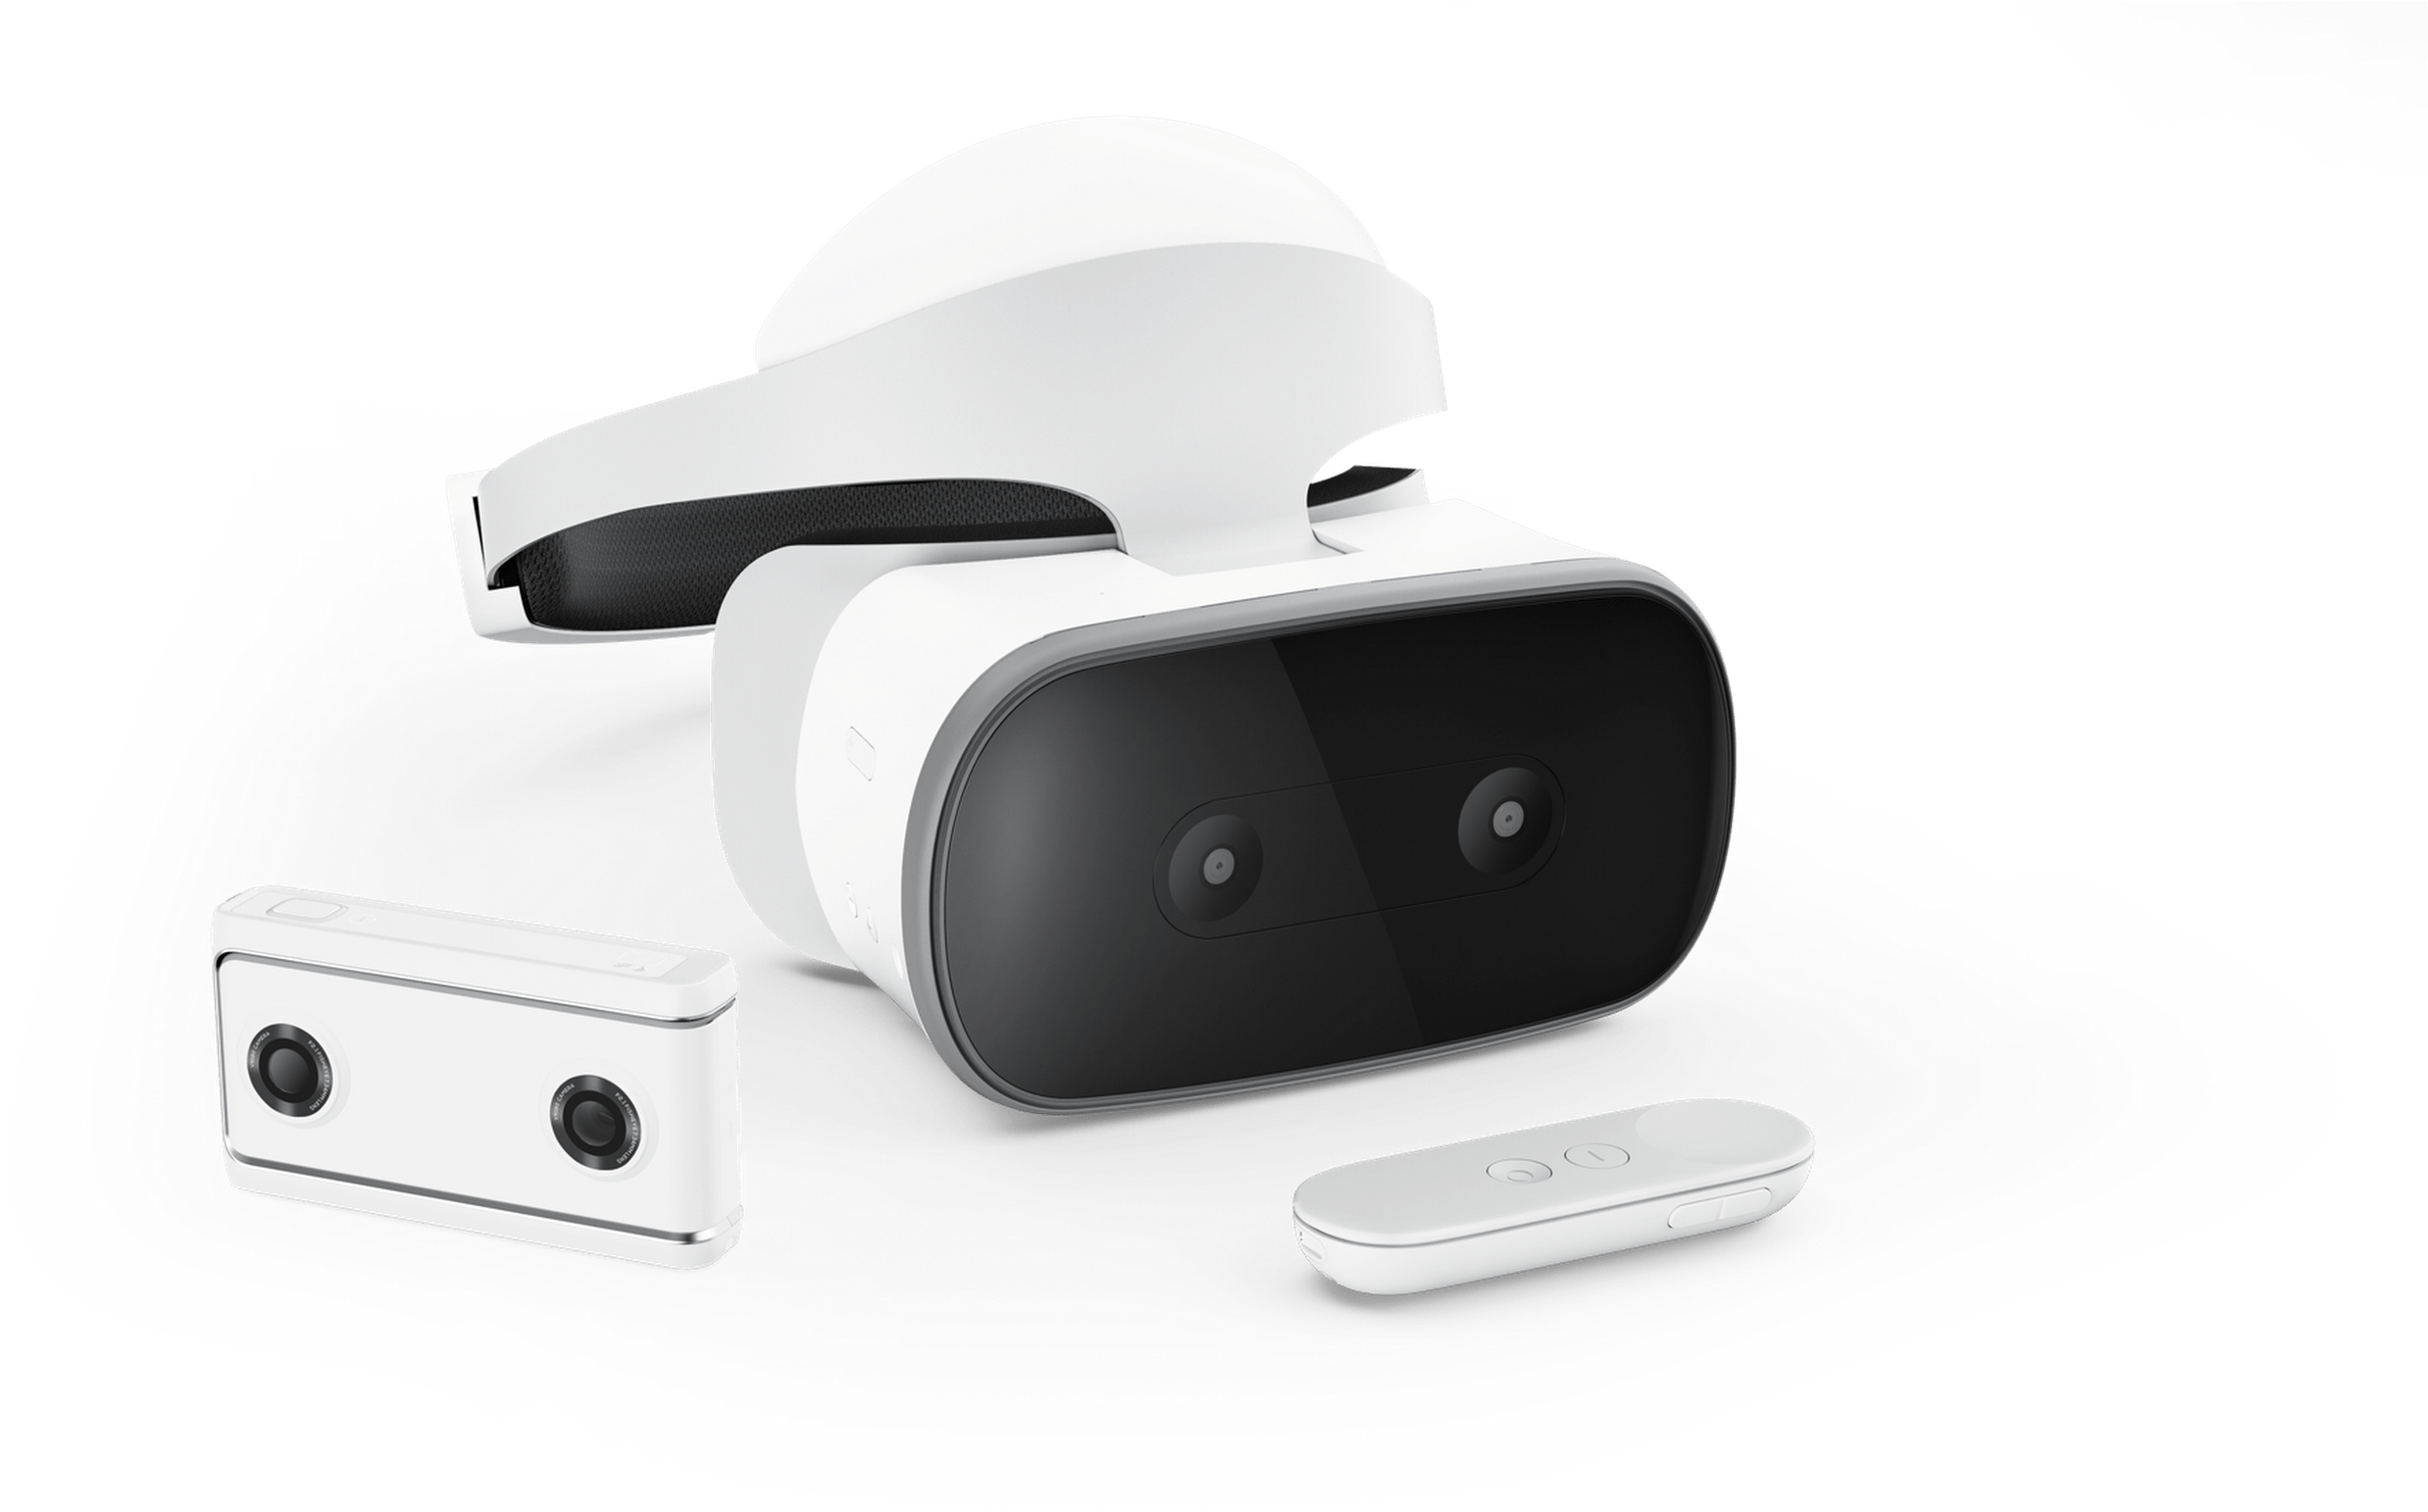 Introducing The First Daydream Standalone Vr Headset - Lenovo Mirage Solo (2800x1576), Png Download